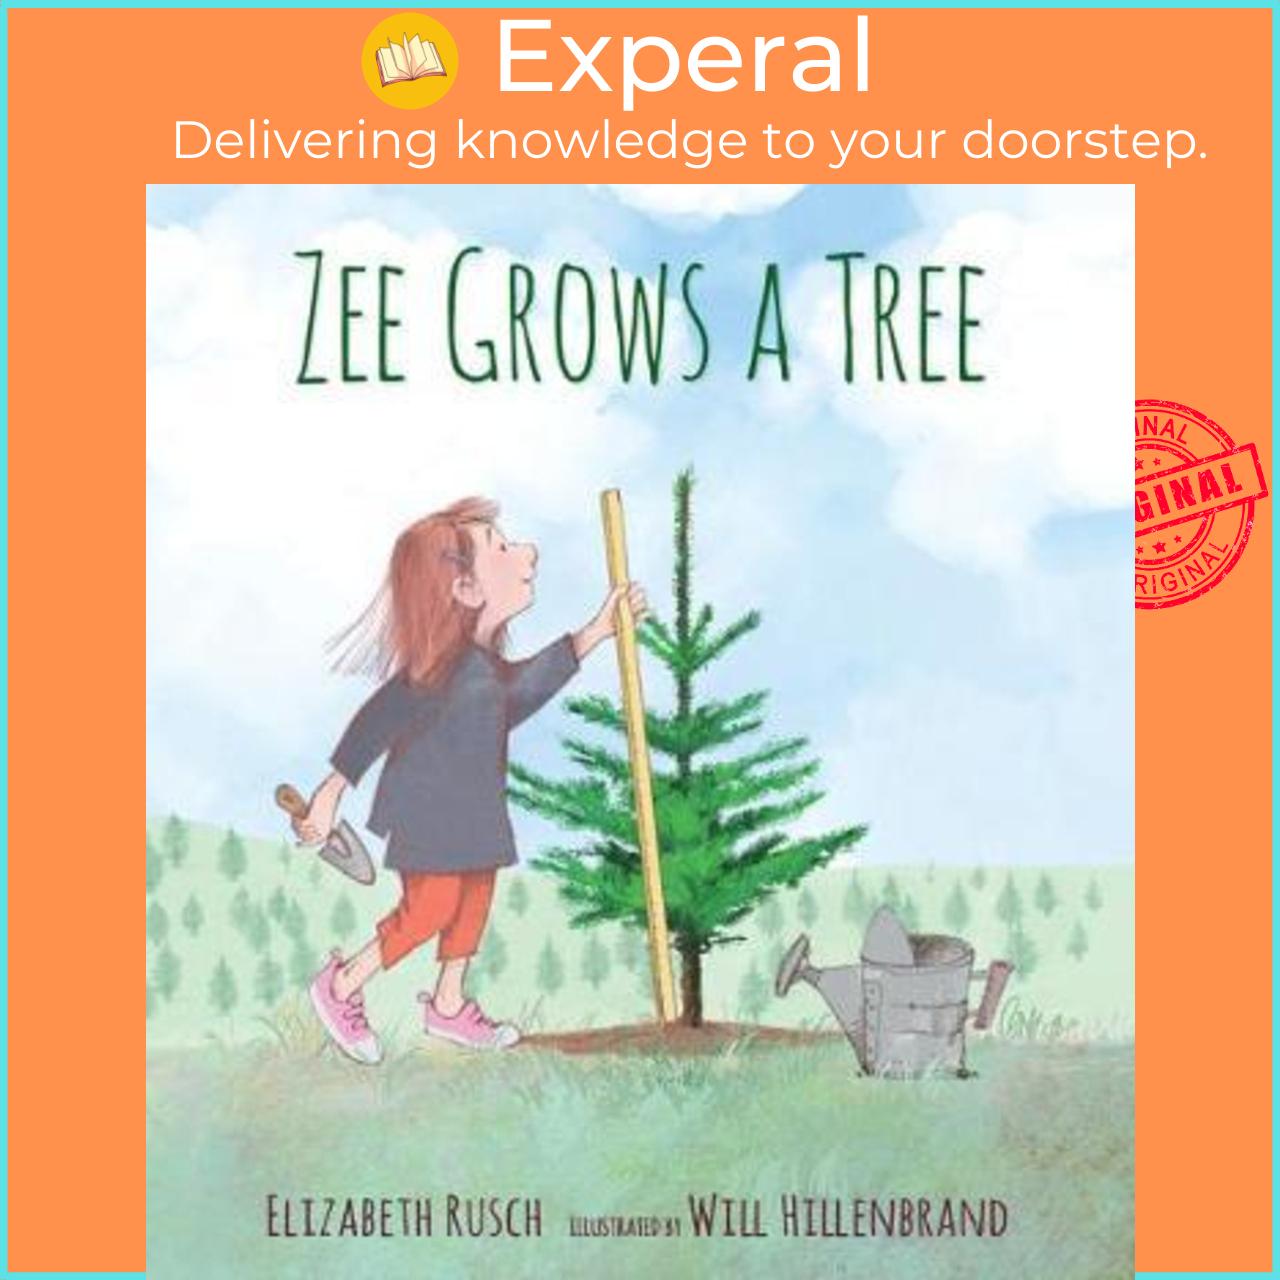 Sách - Zee Grows a Tree by Elizabeth Rusch Will Hillenbrand (US edition, hardcover)